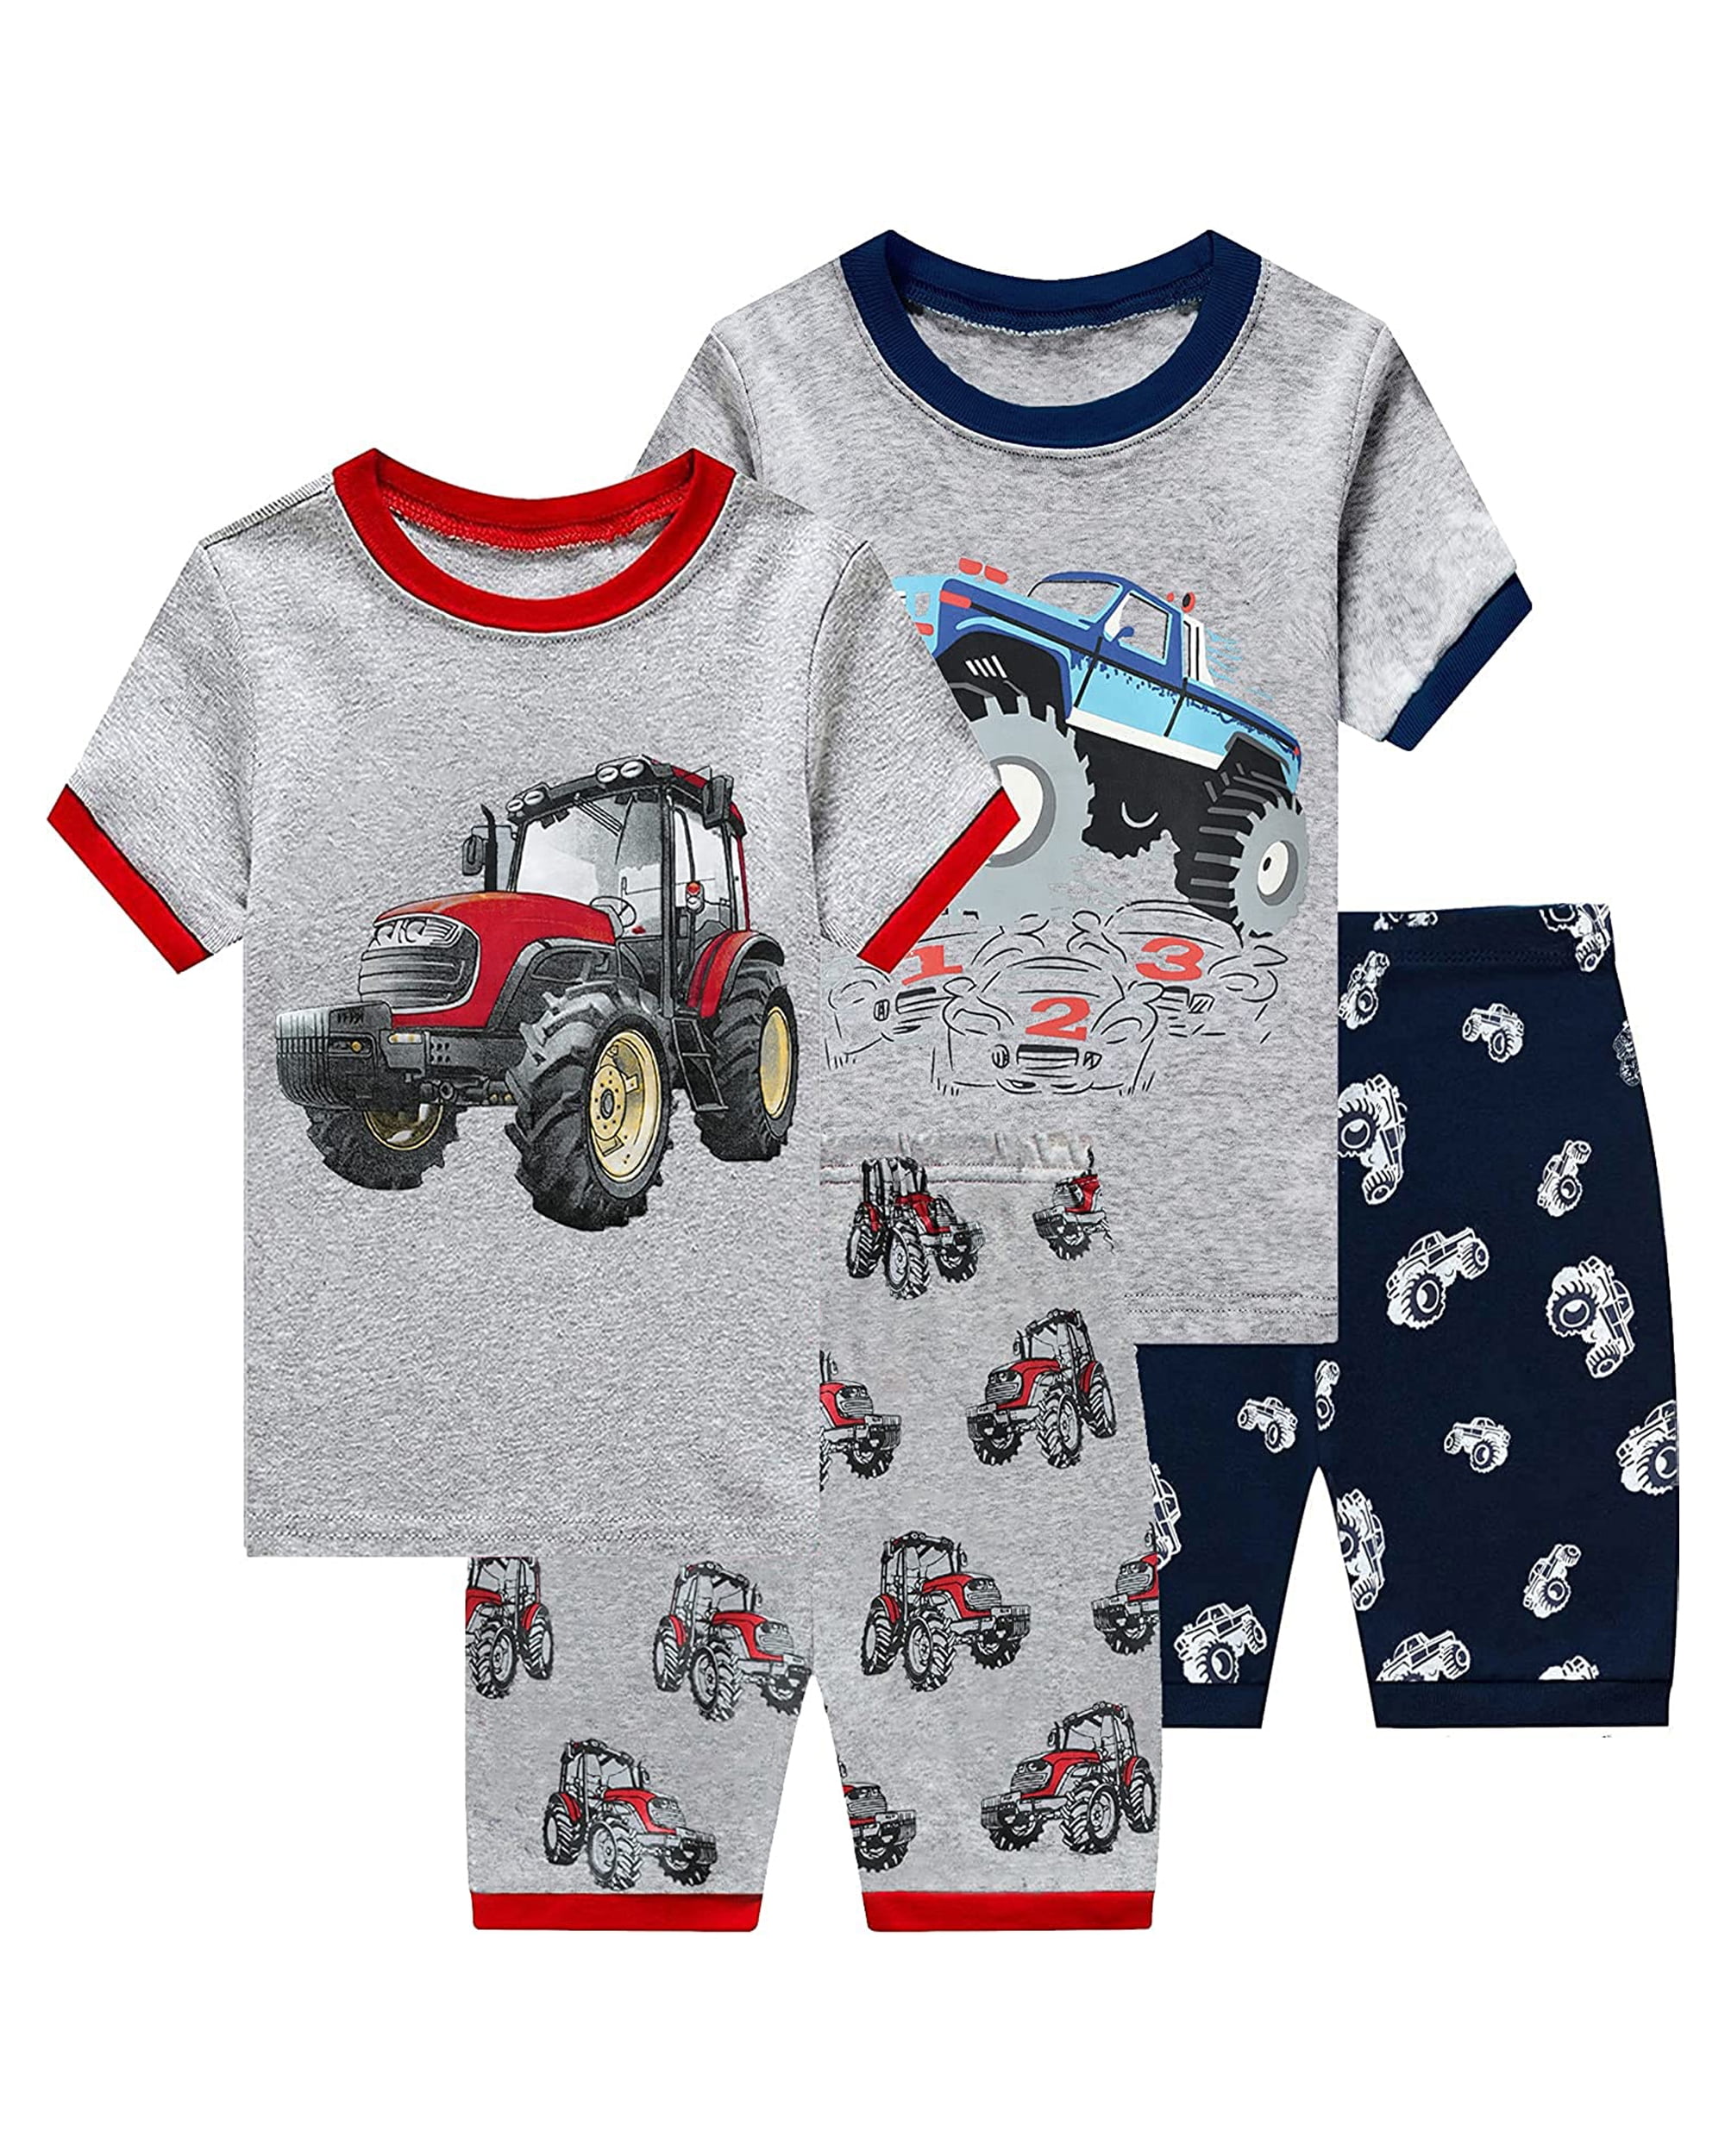 Little Hand Toddler Boys 4 Pieces Tractor Monster Truck Pajamas Set 3T ...